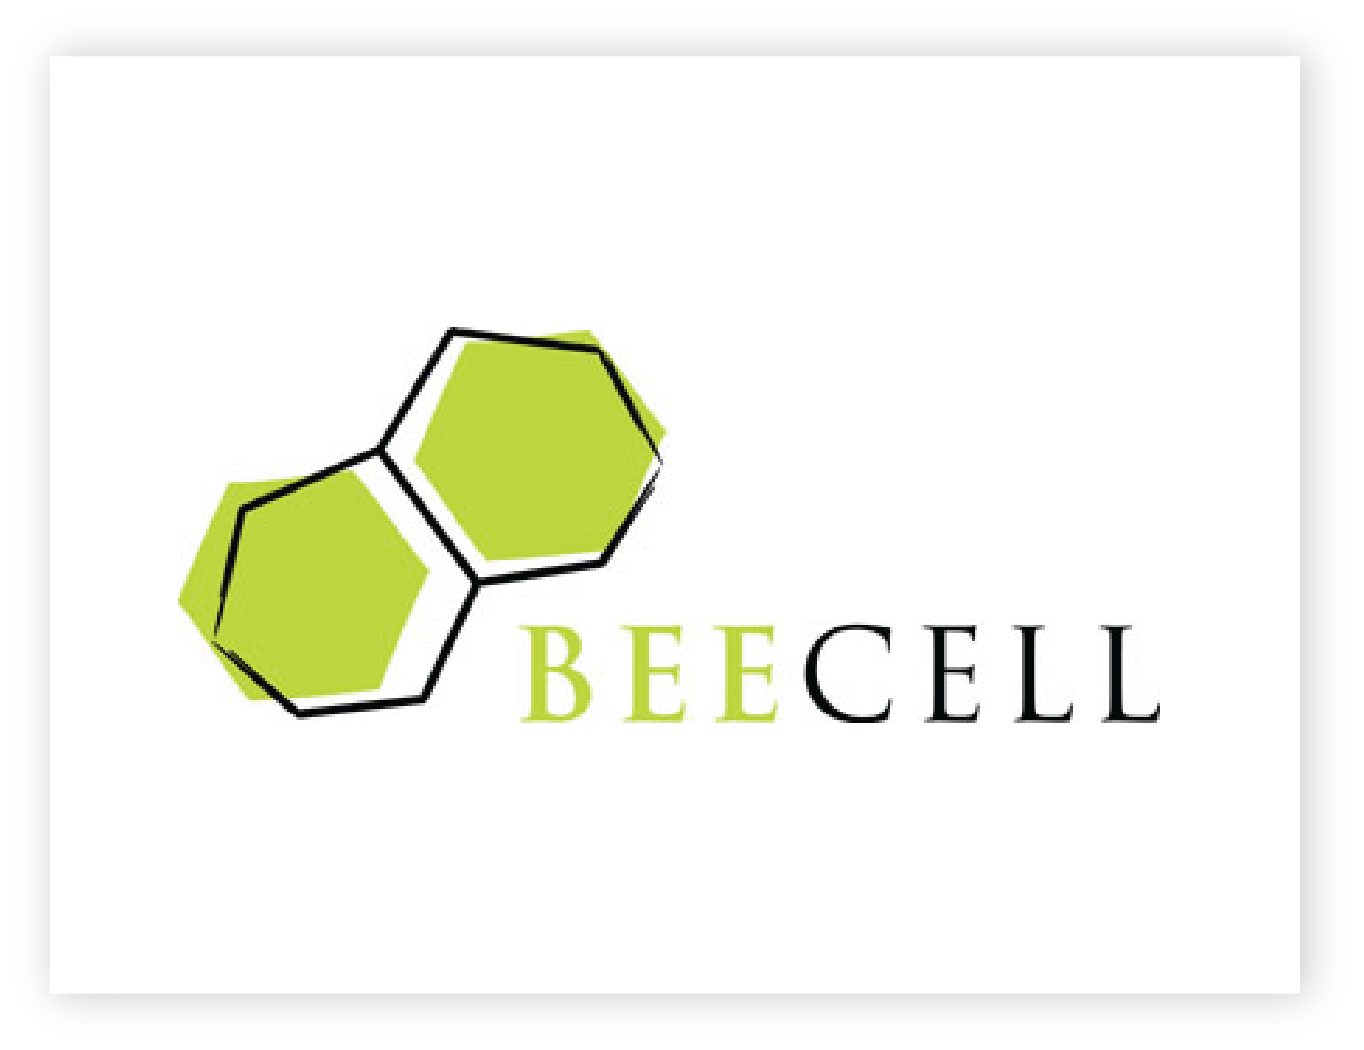 Beecell